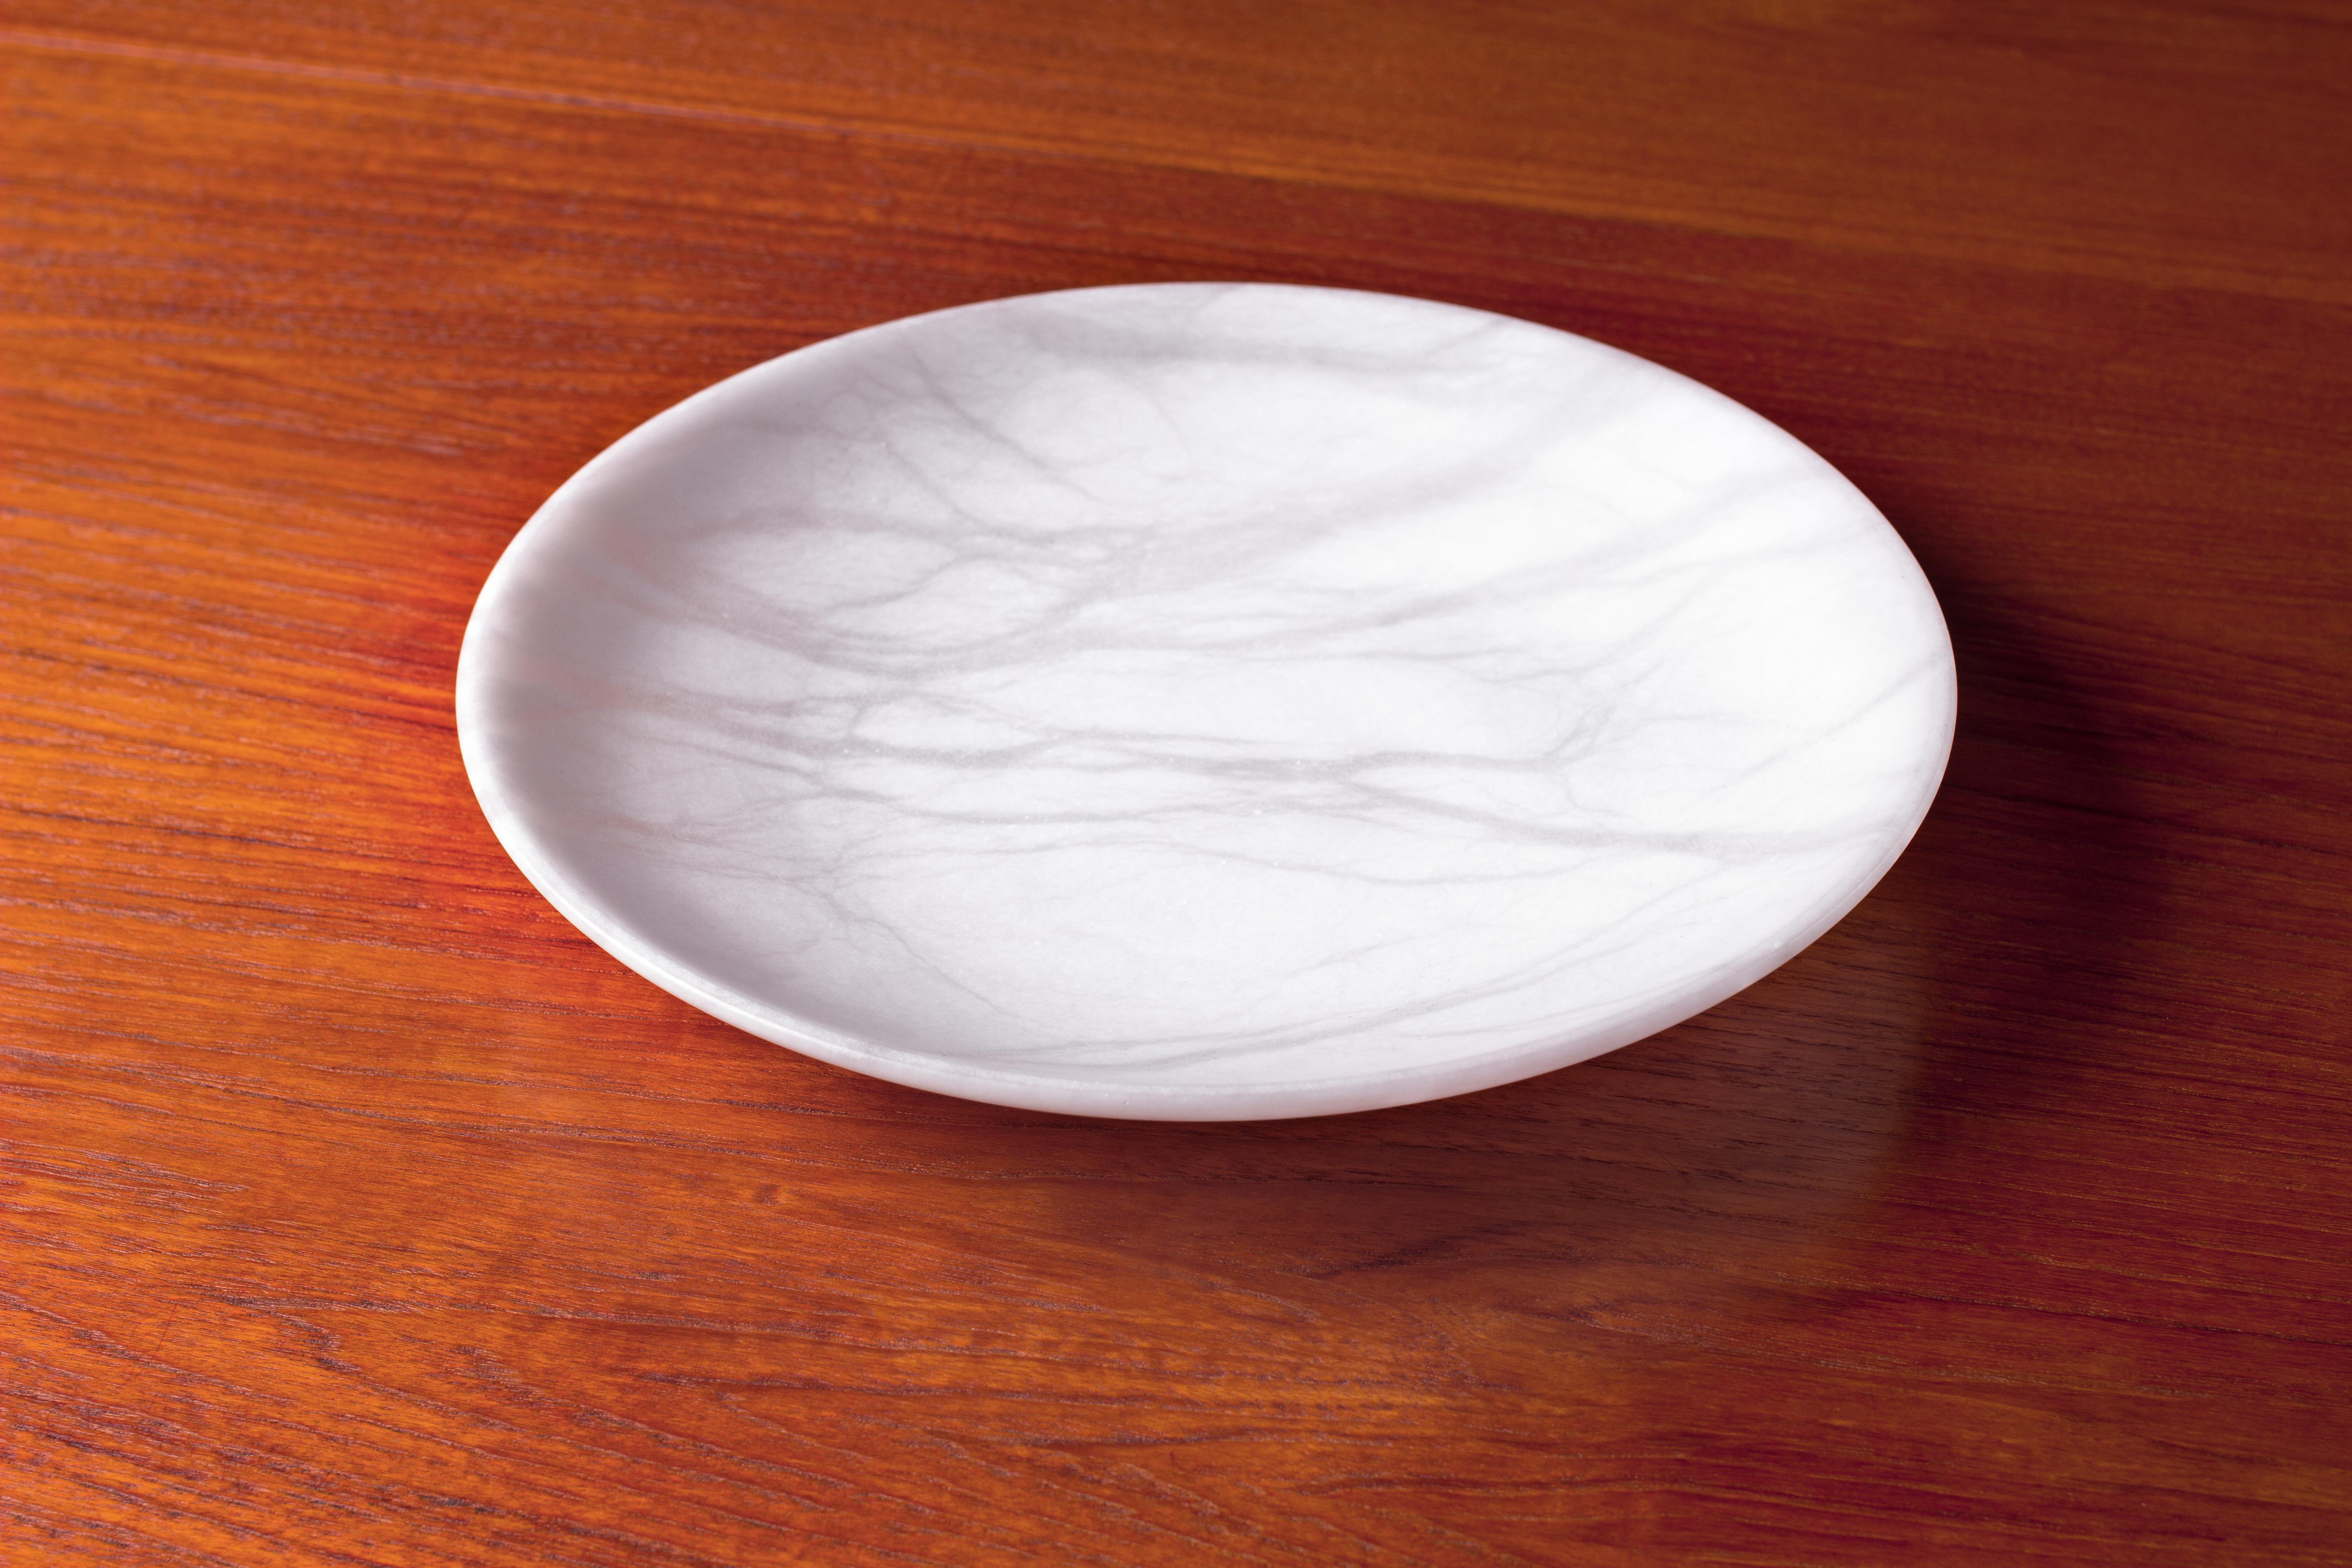 Minimalist Carrara Marble Dish or Fruit Bowl In Good Condition For Sale In Grand Cayman, KY